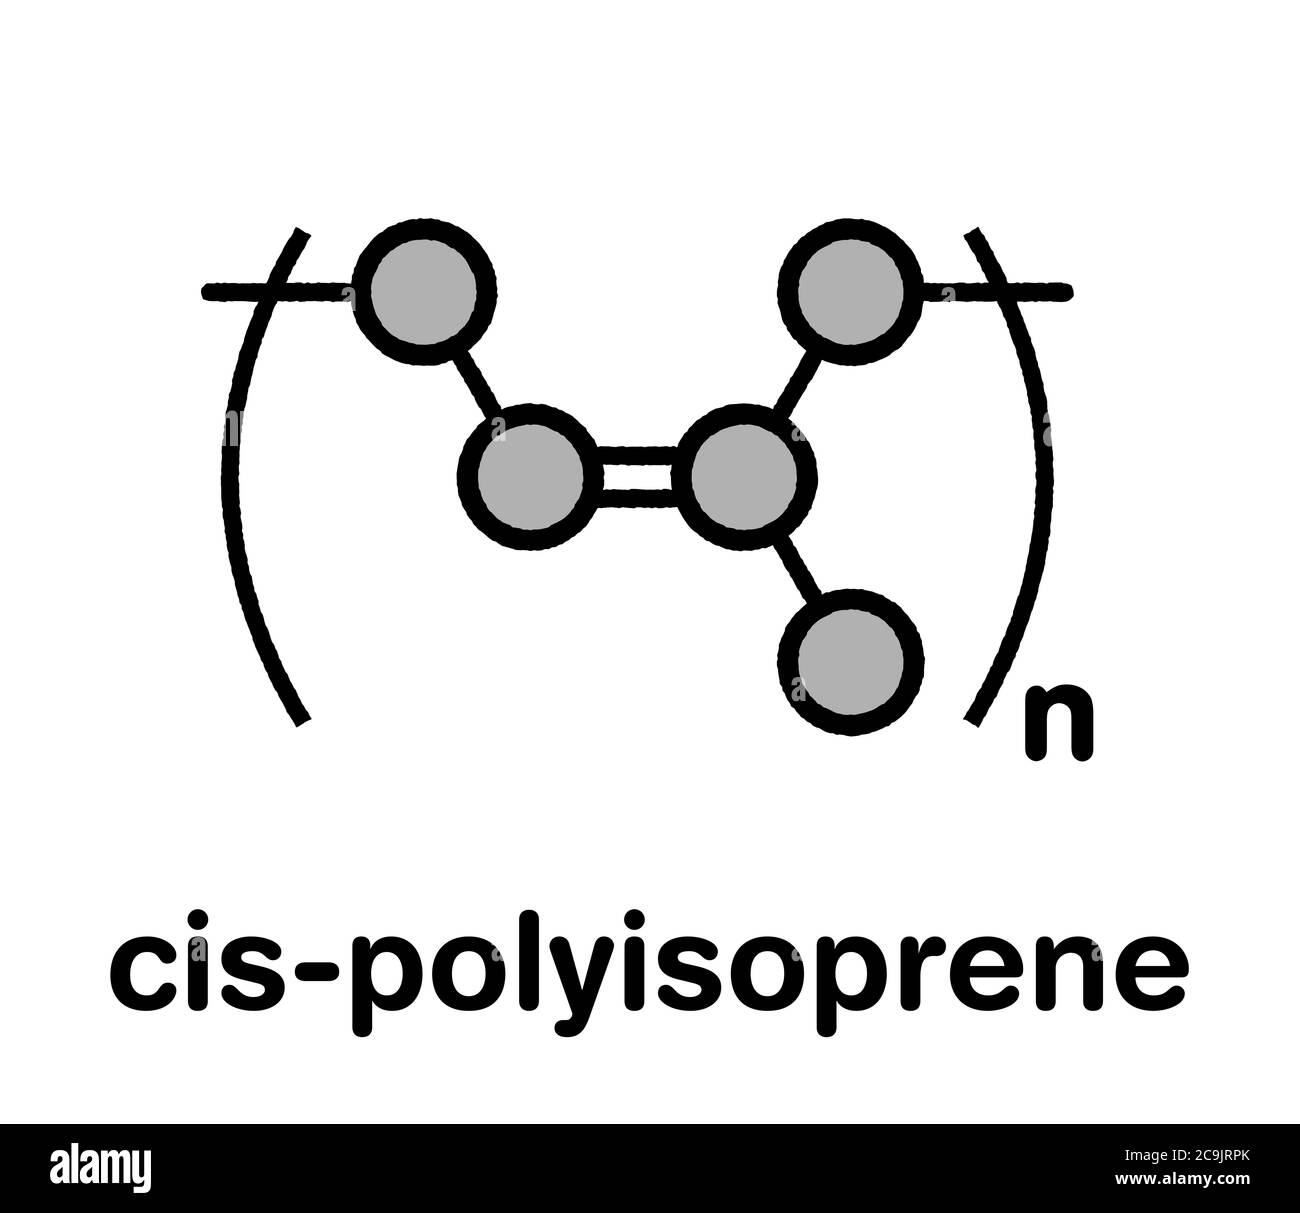 Natural rubber (cis-1,4-polyisoprene), chemical structure. Stylized skeletal formula: Atoms are shown as color-coded circles with thick black outlines Stock Photo